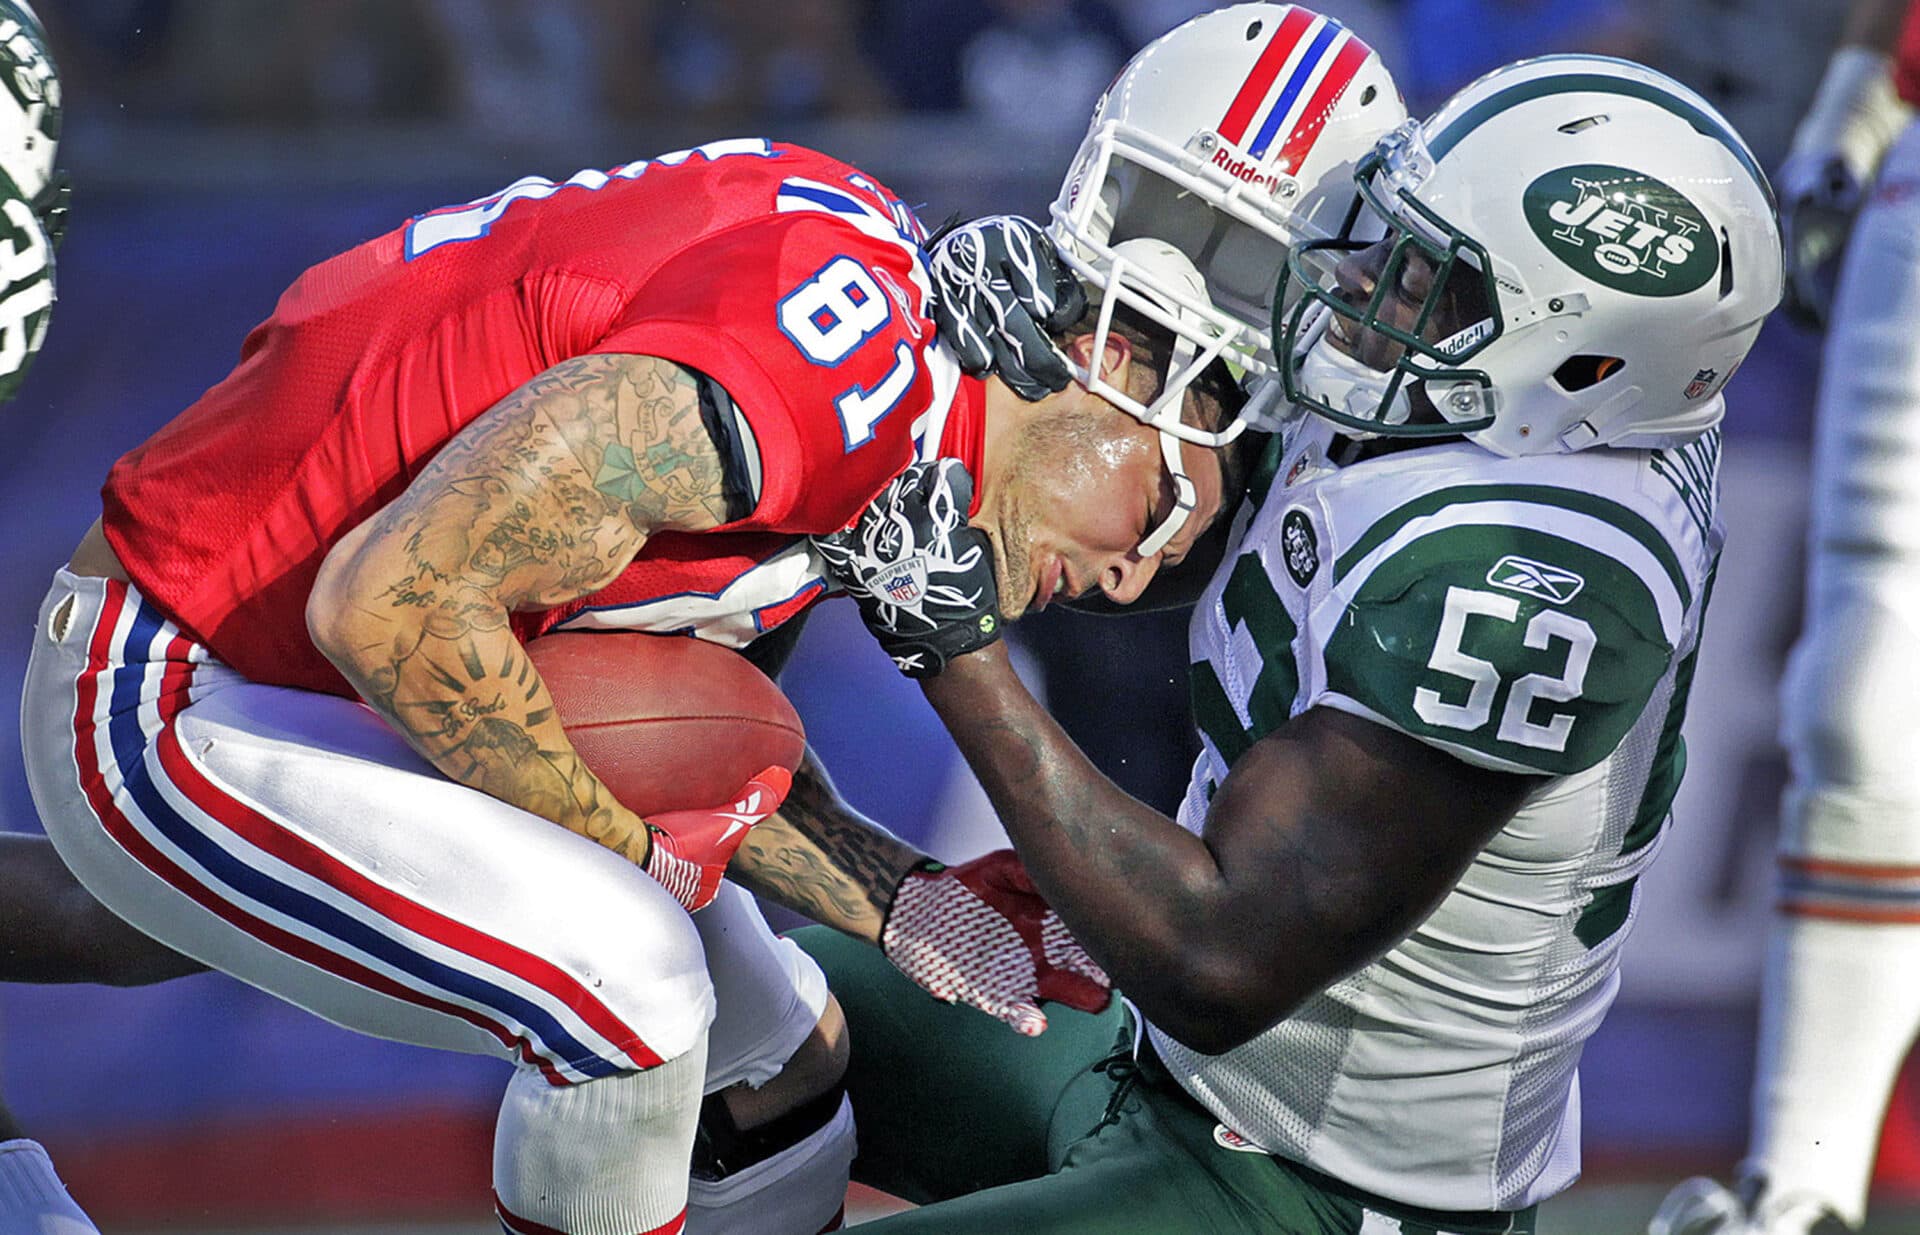 In this 2011 Boston Globe file photo, Patriots tight end Aaron Hernandez, left, is taken down by a Jets player after a catch and loses his helmet in the process. (Jim Davis/Boston Globe)